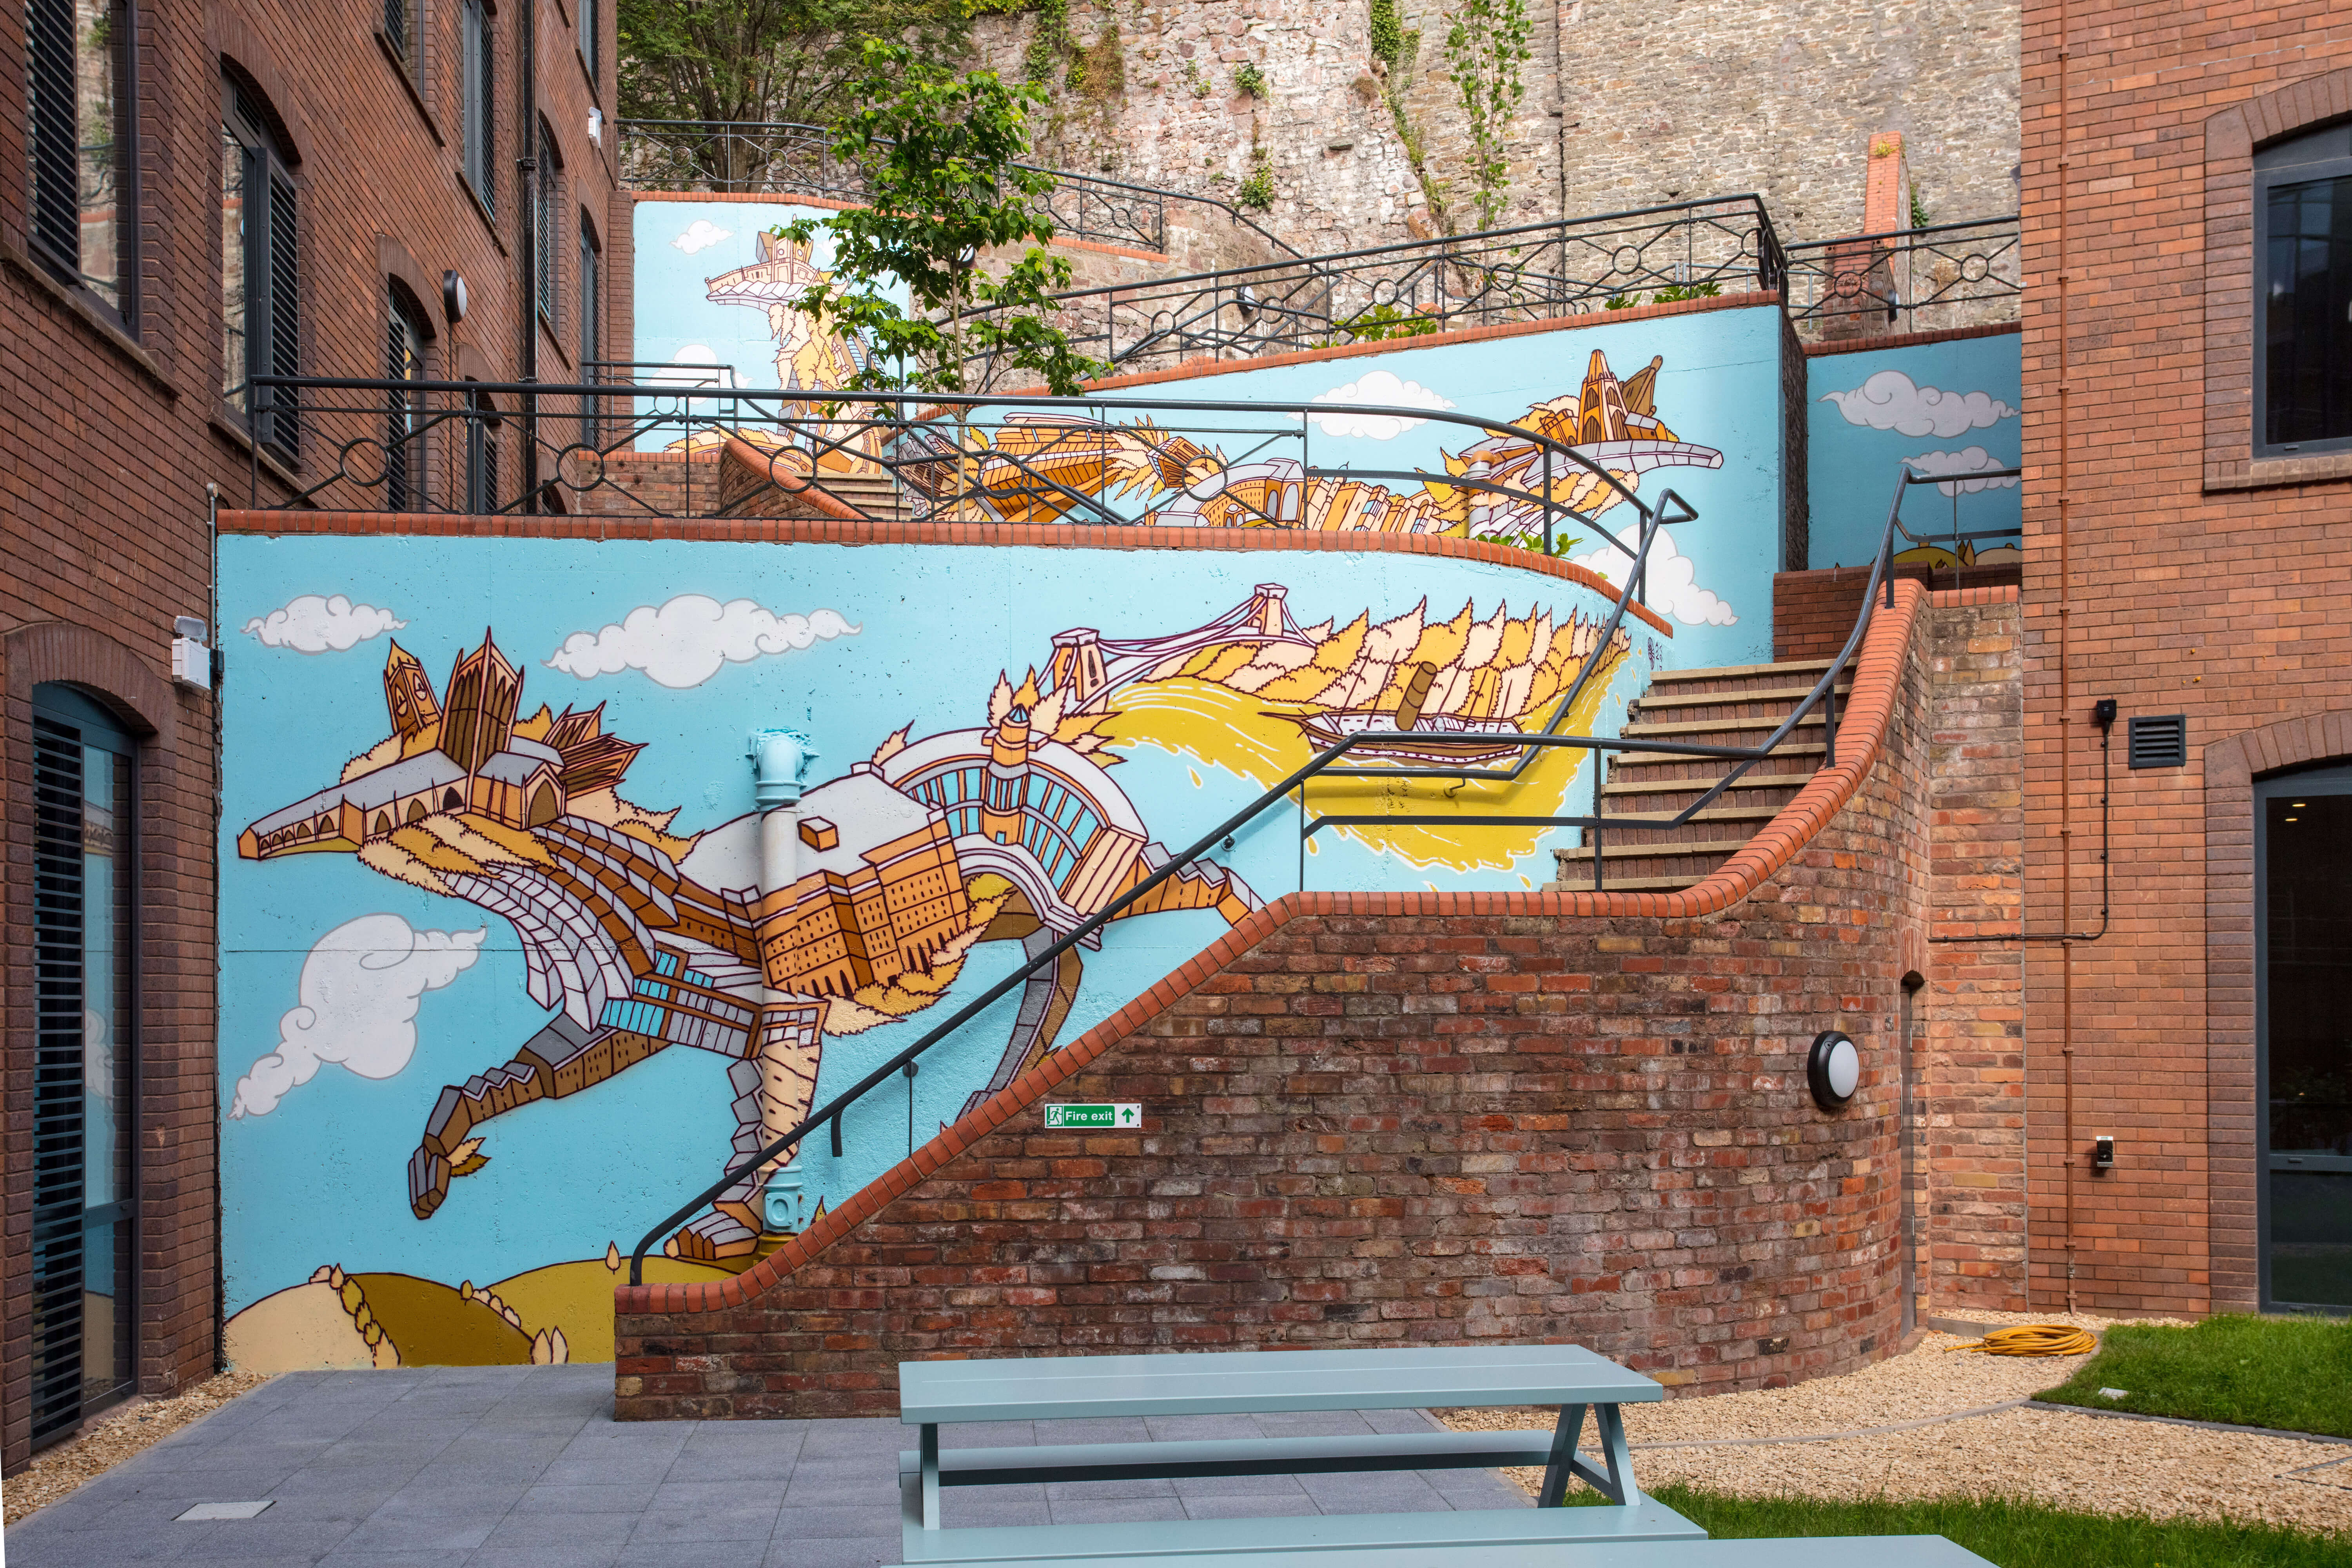 Artwork on a wall by steps outside